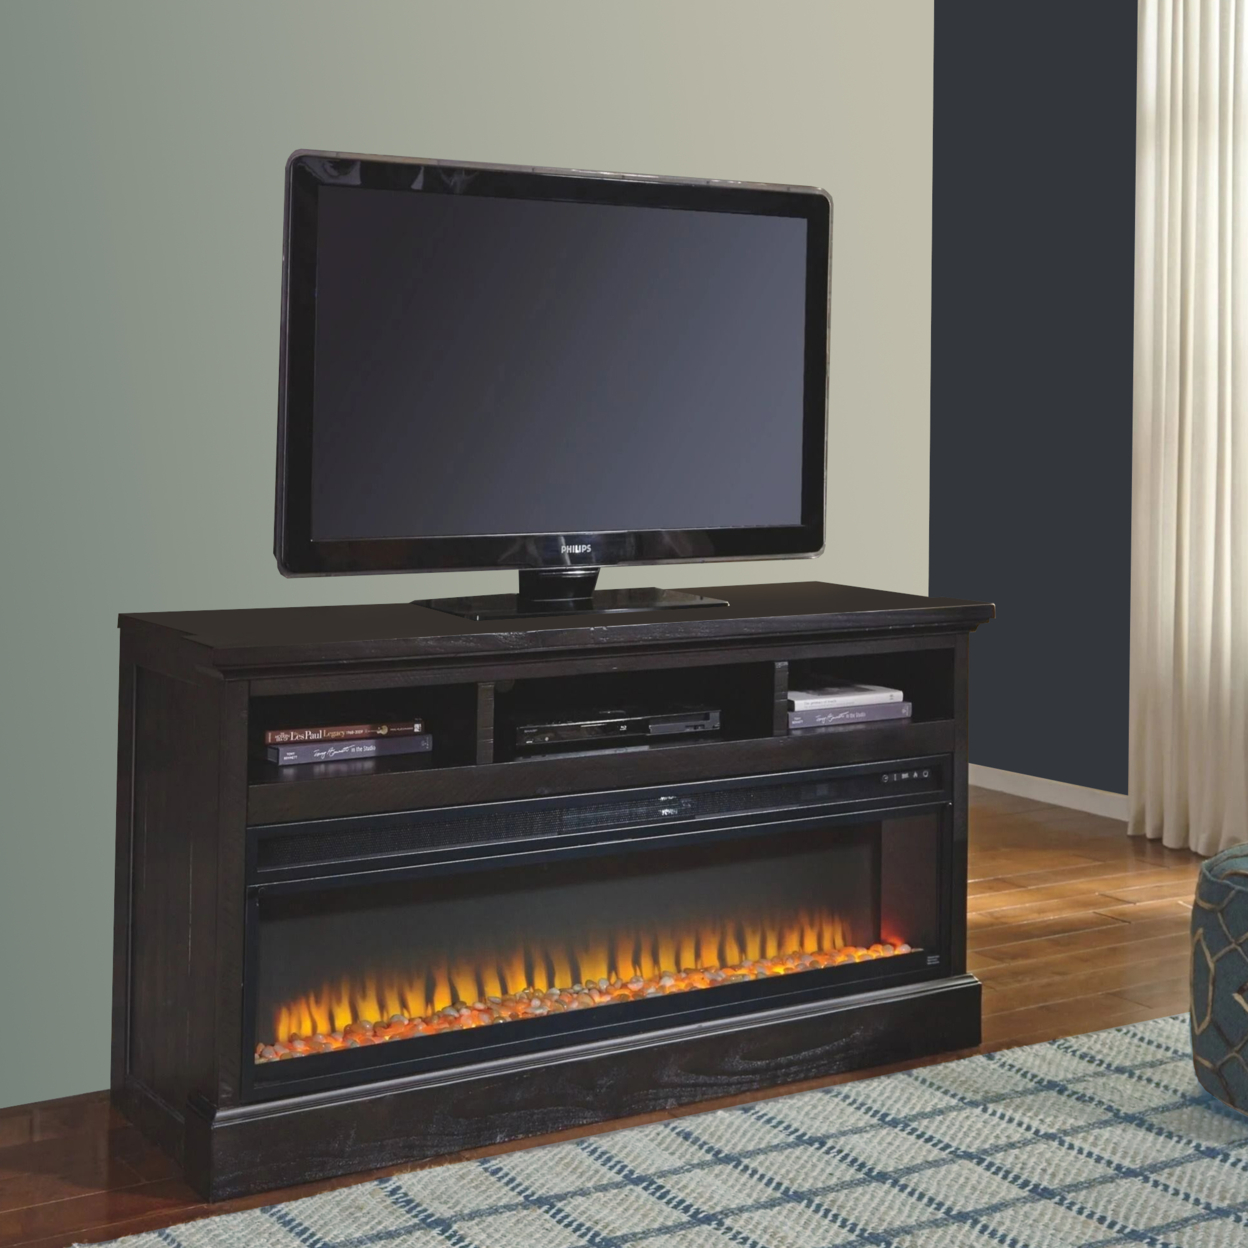 57 Inch Metal Fireplace Inset With 6 Level Temperature Setting, Black- Saltoro Sherpi